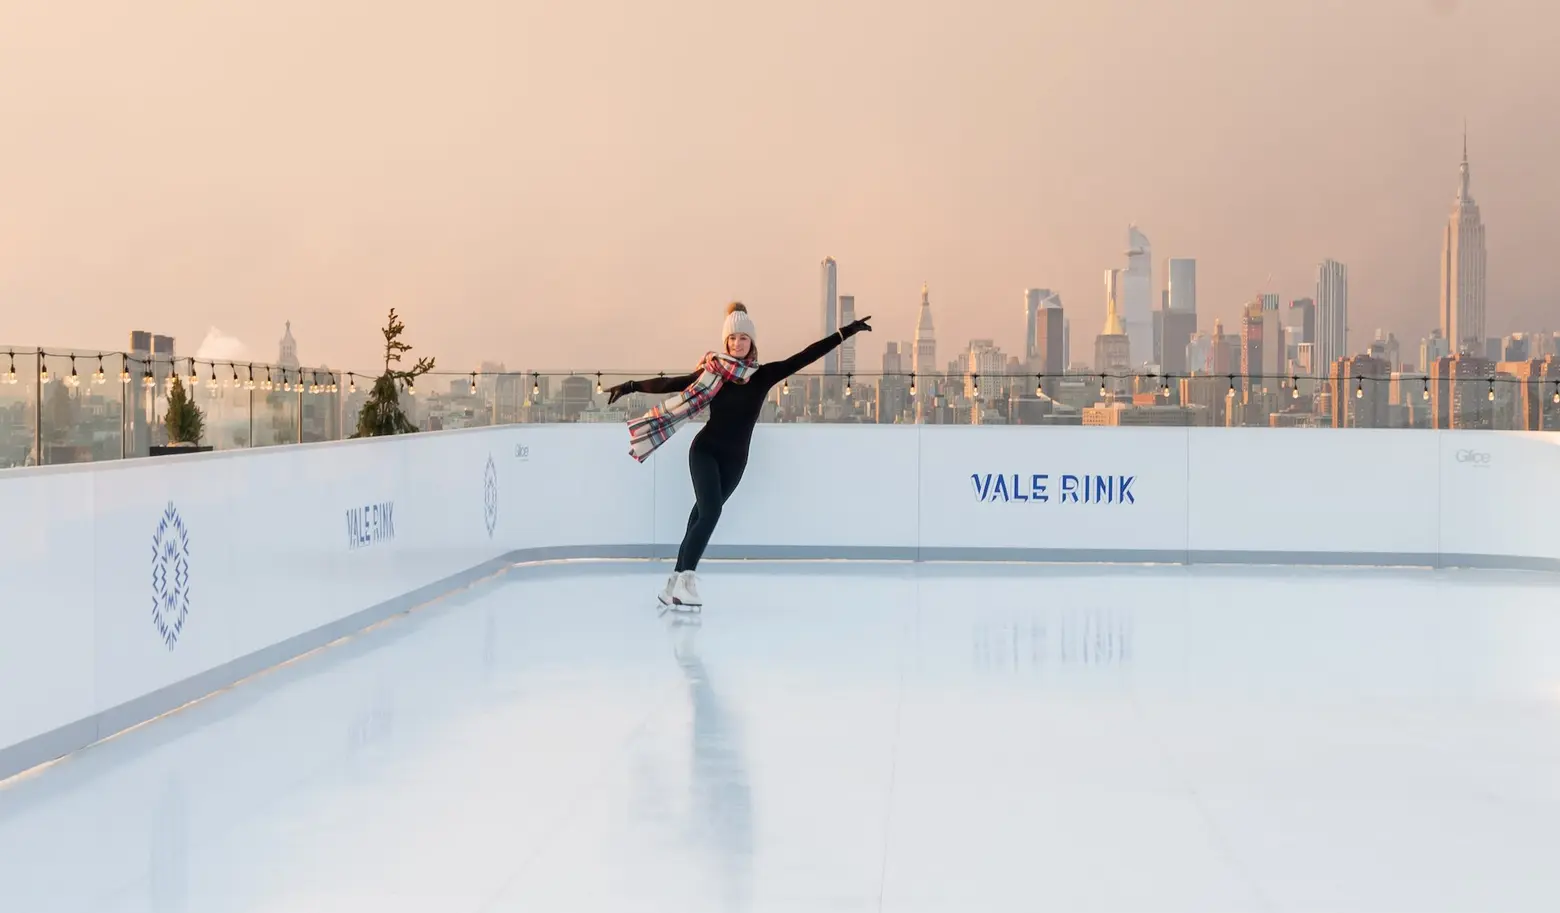 Williamsburg’s William Vale hotel opens rooftop ice skating rink with skyline views